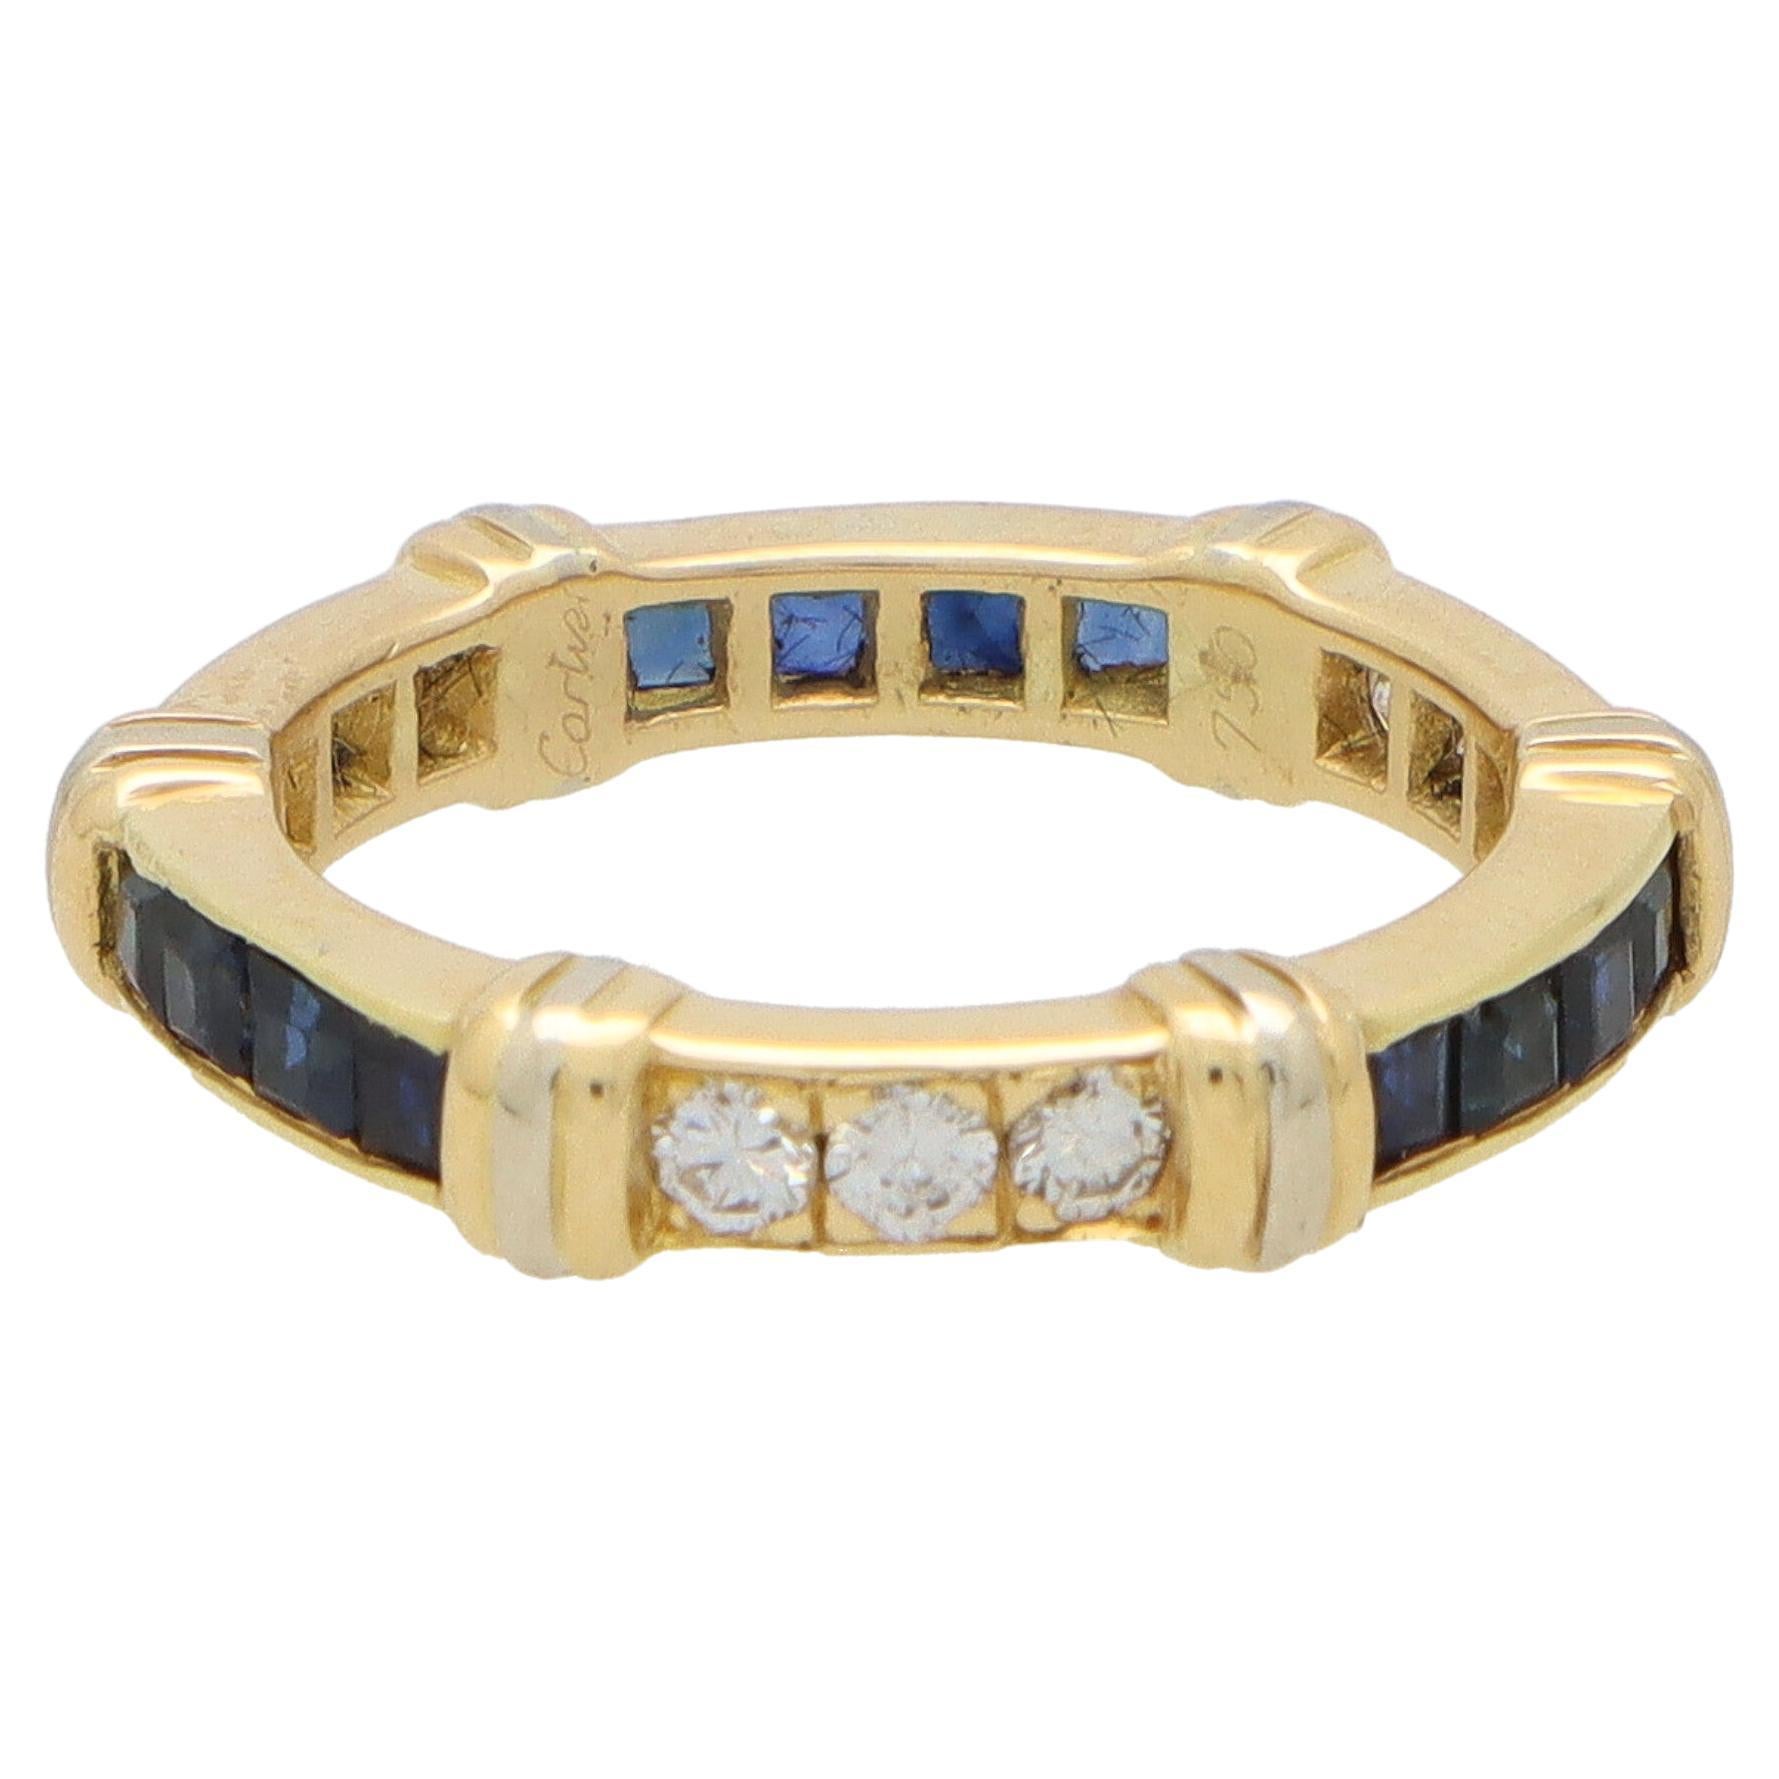 Vintage Cartier Sapphire and Diamond Eternity Band Ring Set in 18k Yellow Gold